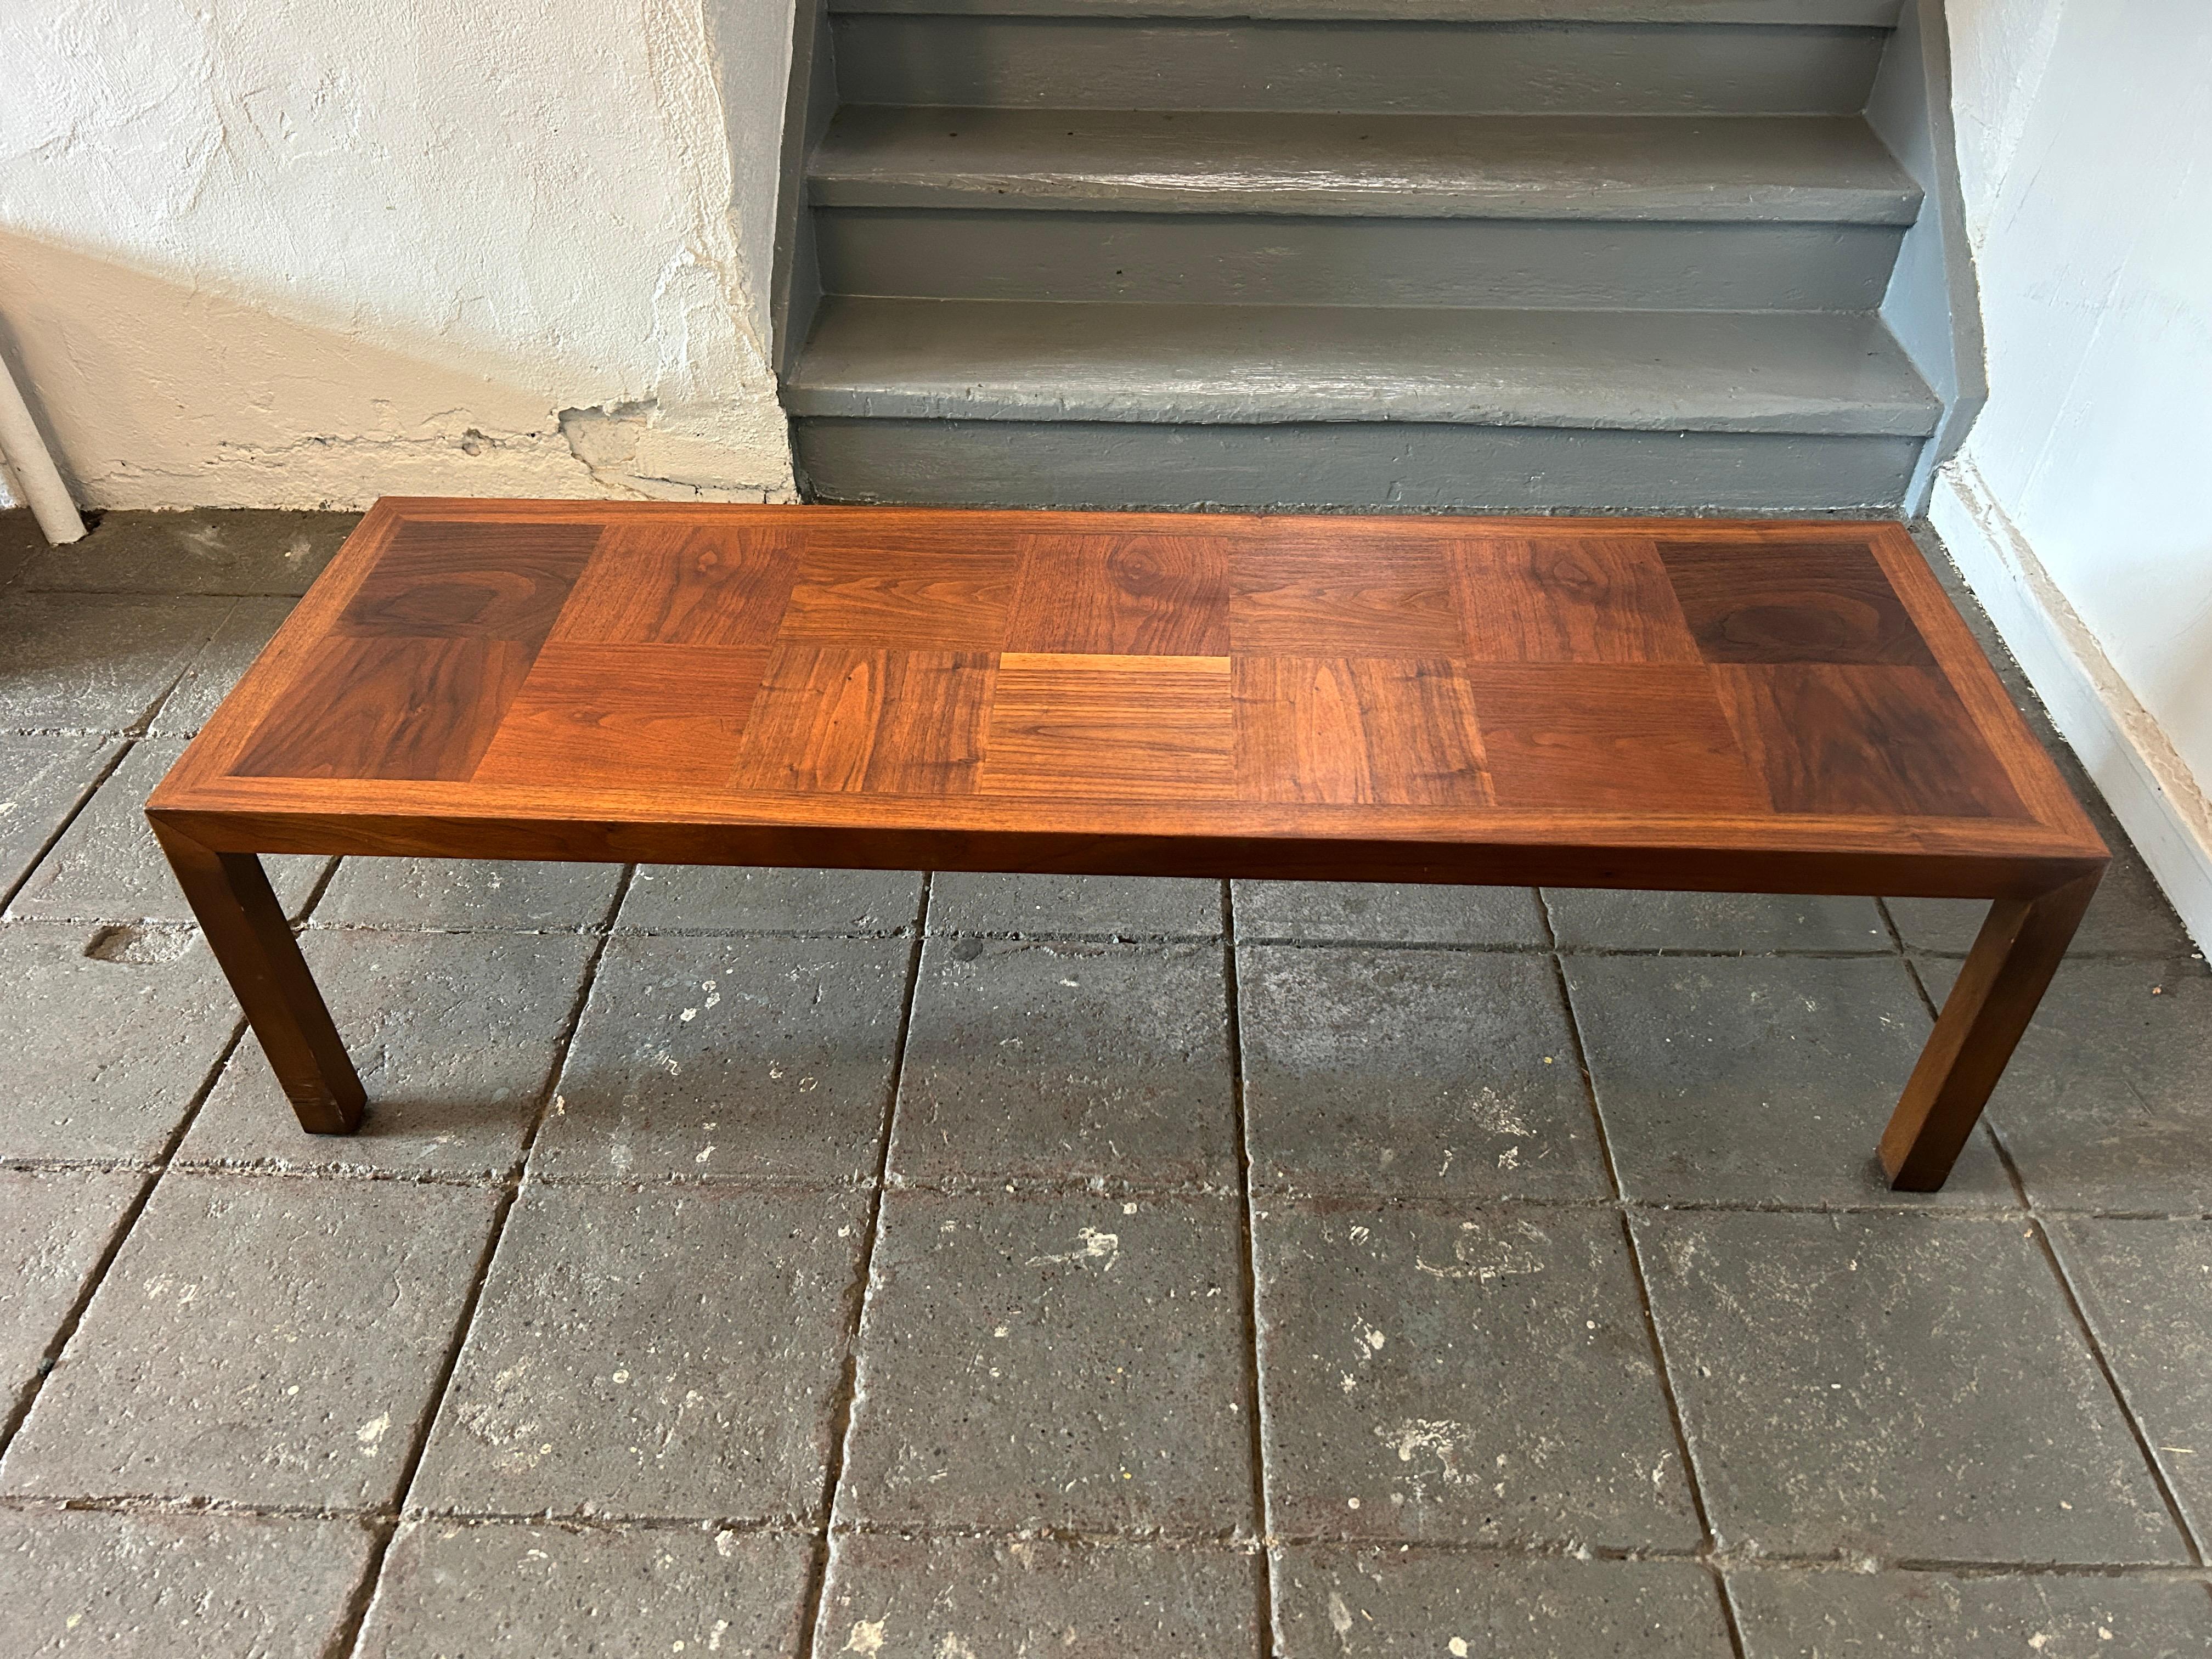 Mid century modern Lane walnut checkered parsons coffee table. Great Solid Coffee table. Simple rectangle design with checkerboard walnut veneer top. Made in USA. Labeled LANE. Located in Brooklyn NYC

Measures 57